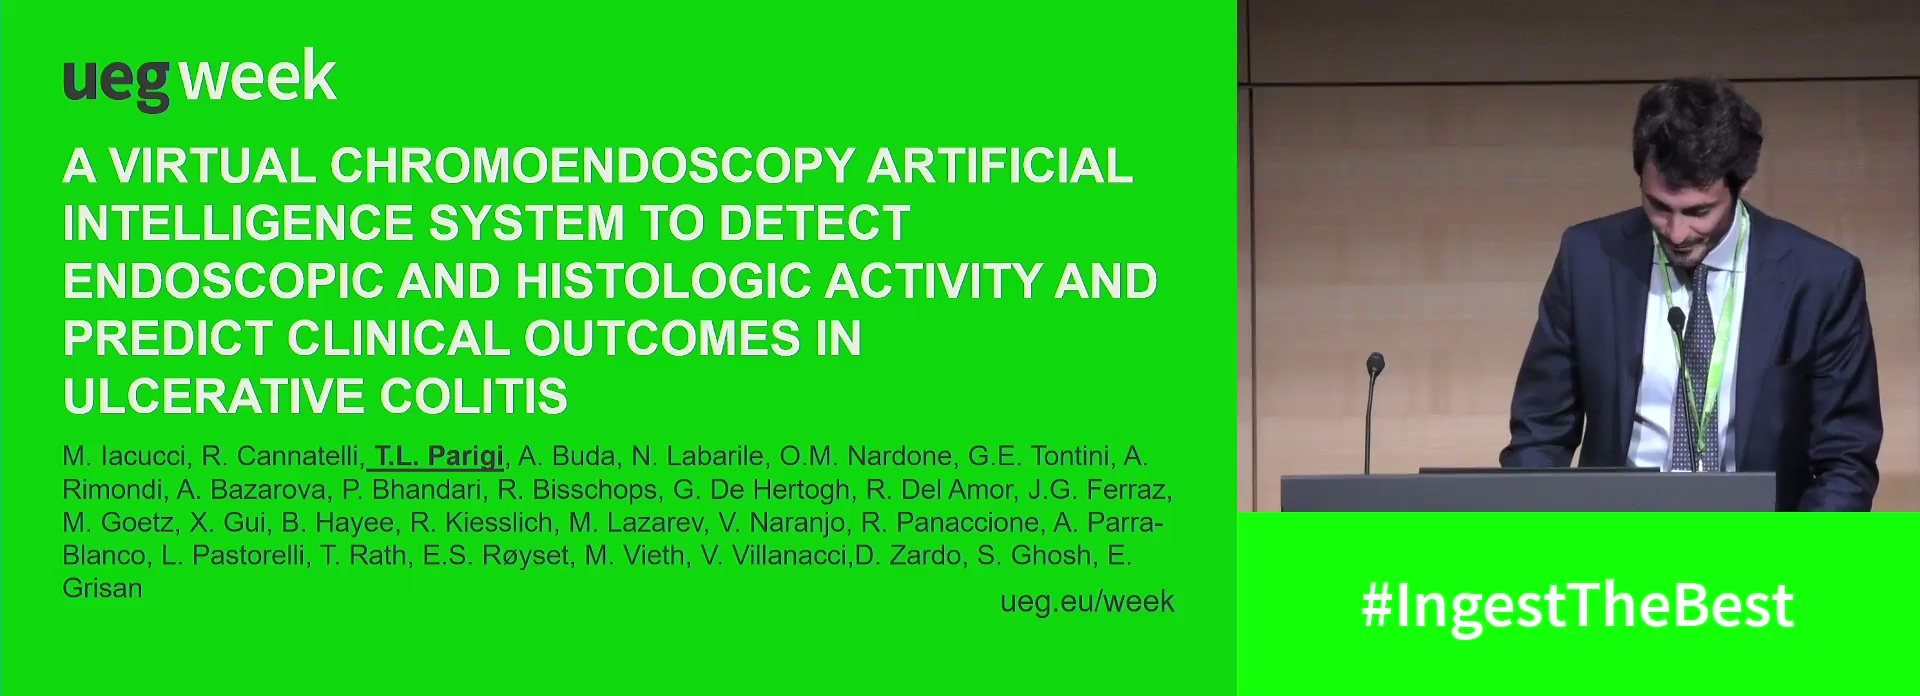 A VIRTUAL CHROMOENDOSCOPY ARTIFICIAL INTELLIGENCE SYSTEM TO DETECT ENDOSCOPIC AND HISTOLOGIC ACTIVITY/REMISSION AND PREDICT CLINICAL OUTCOMES IN ULCERATIVE COLITIS